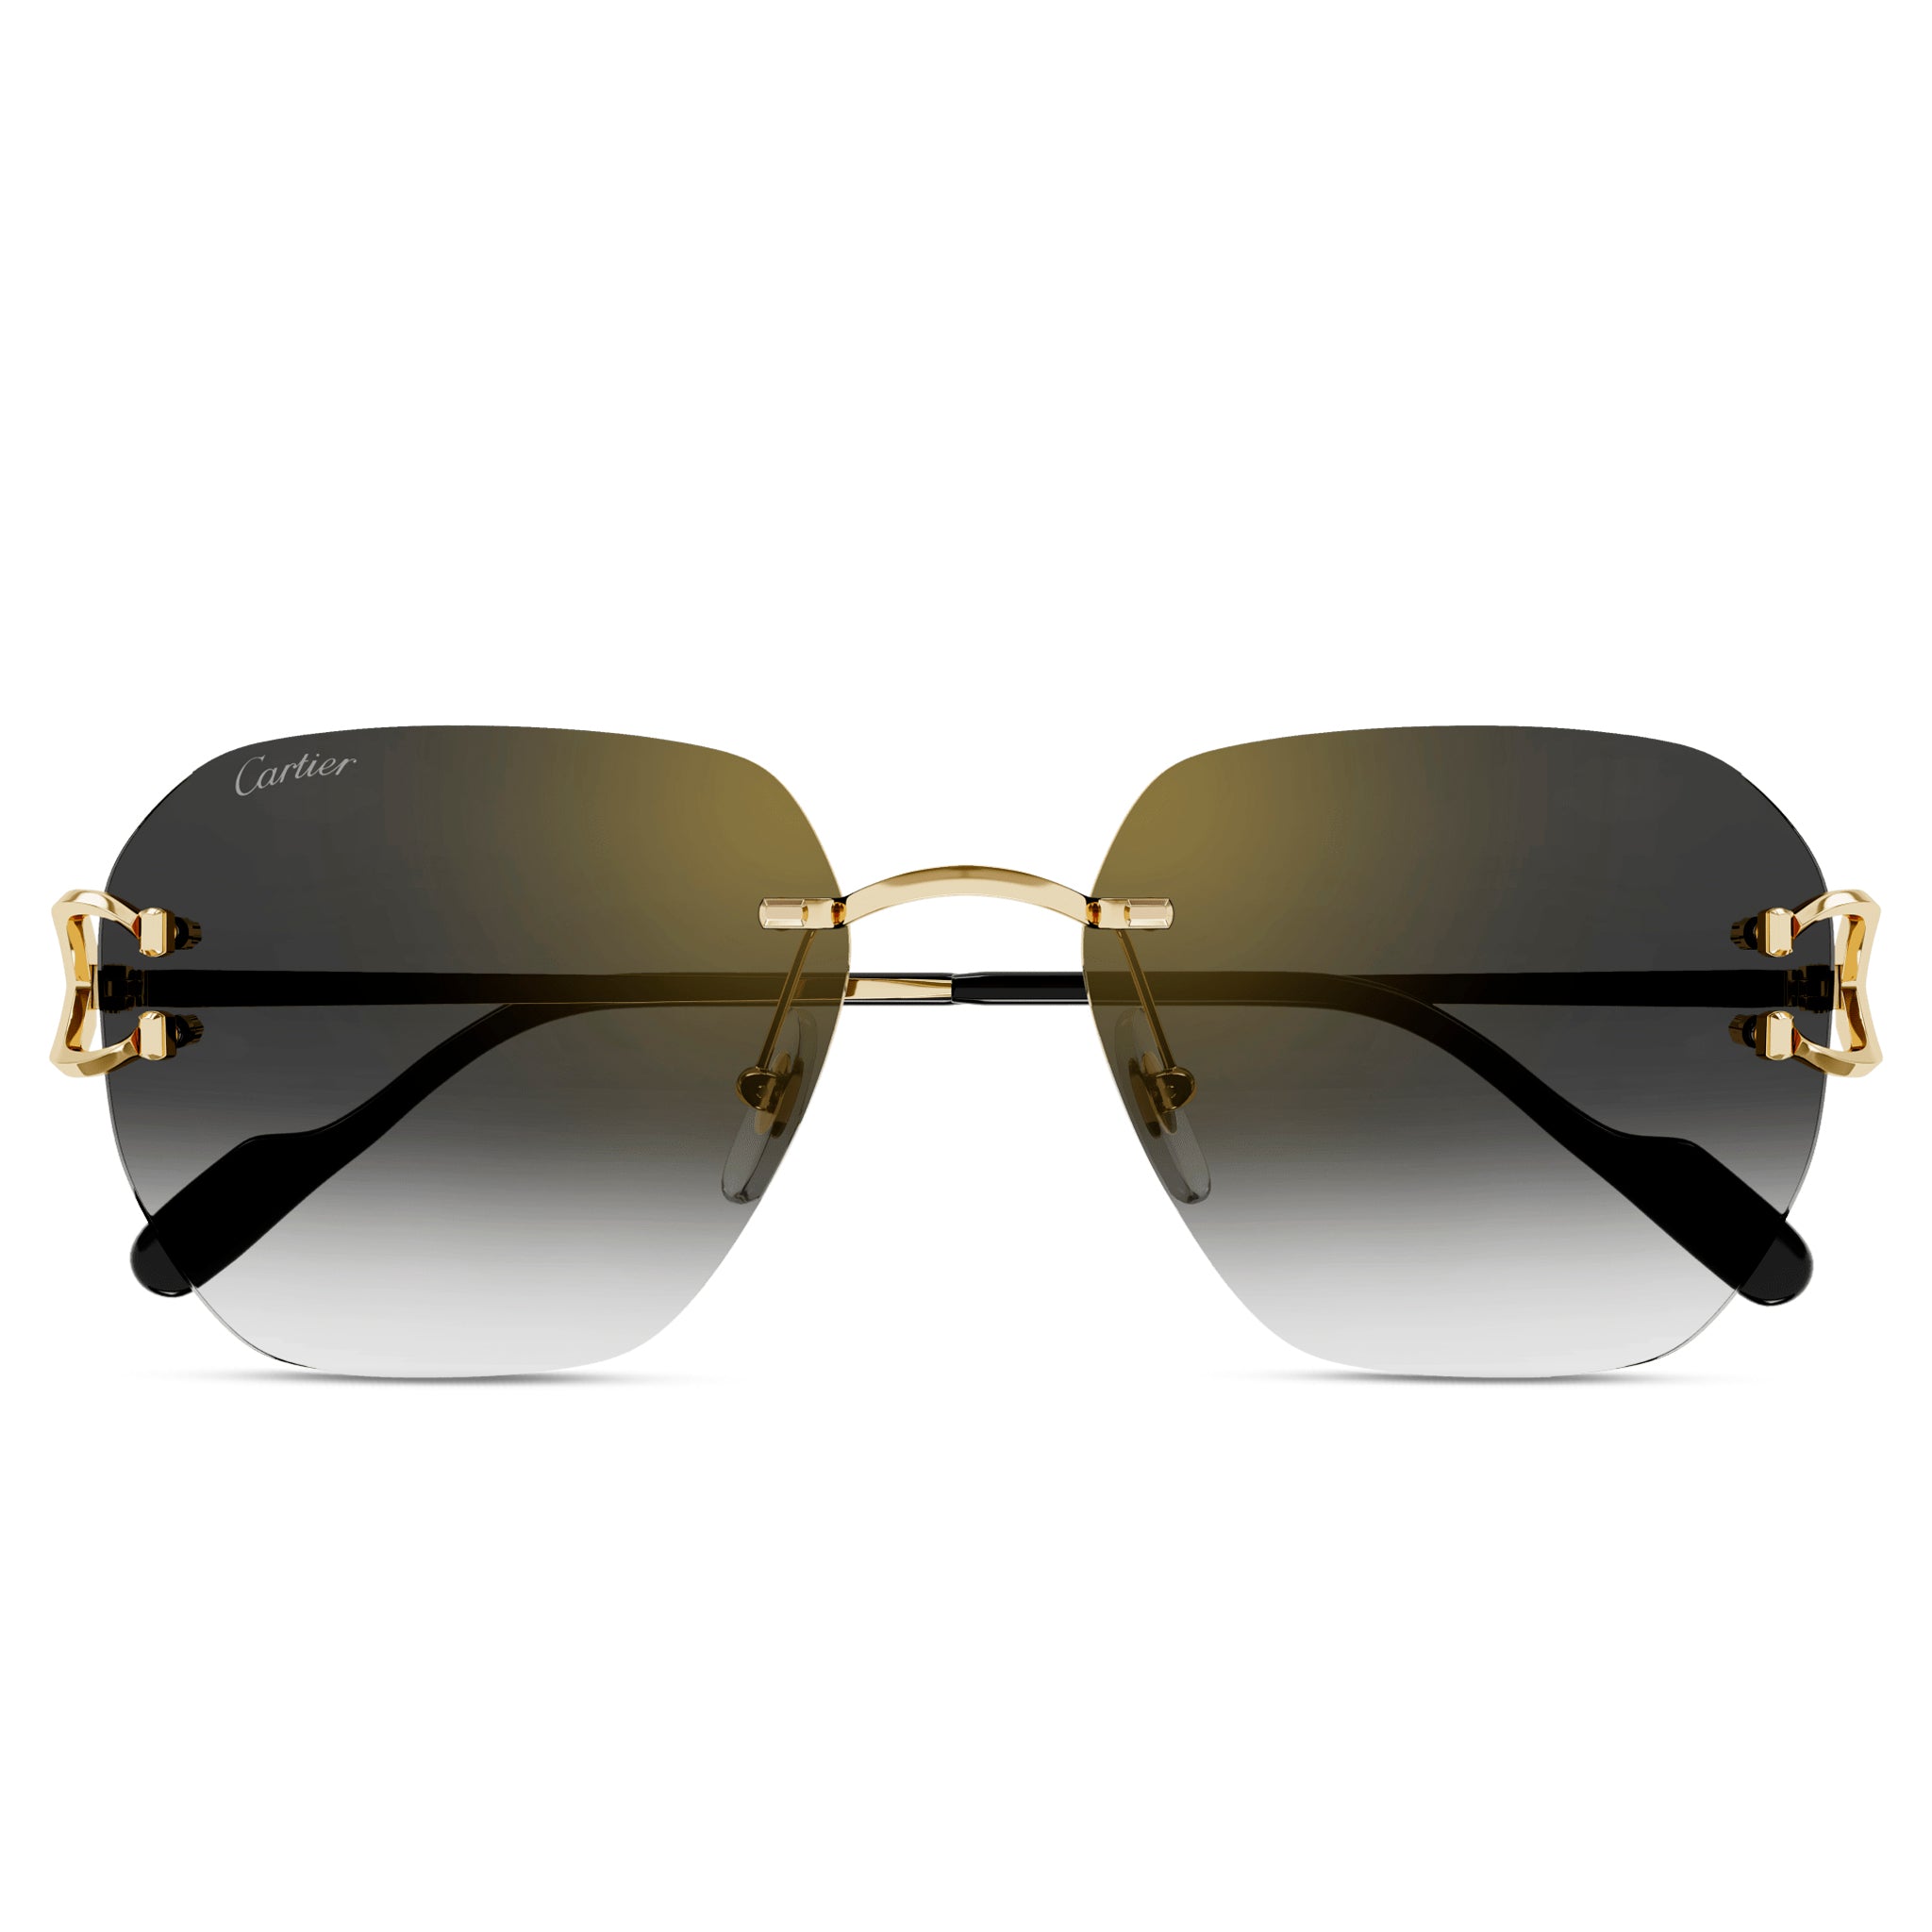 Front view of Cartier Eyewear CT0394S-001 C Decor Gold Grey Rimless Sunglasses 